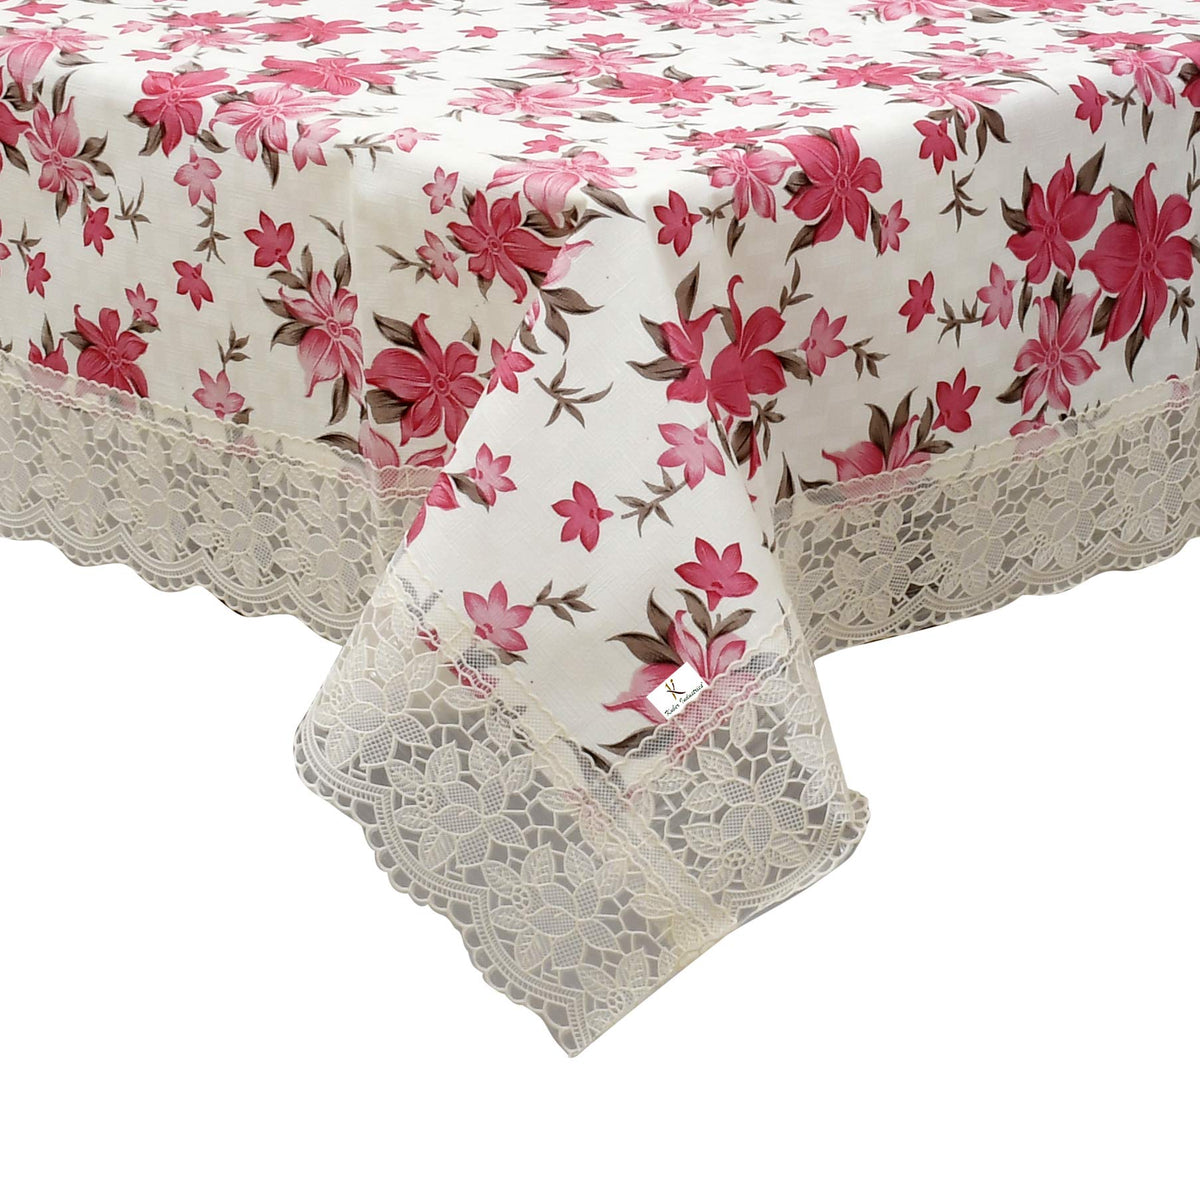 Kuber Industries Dining Table Cover 6 Seater|Table Cloth|Table Cover for Home, Restaurant|(Pink, White)